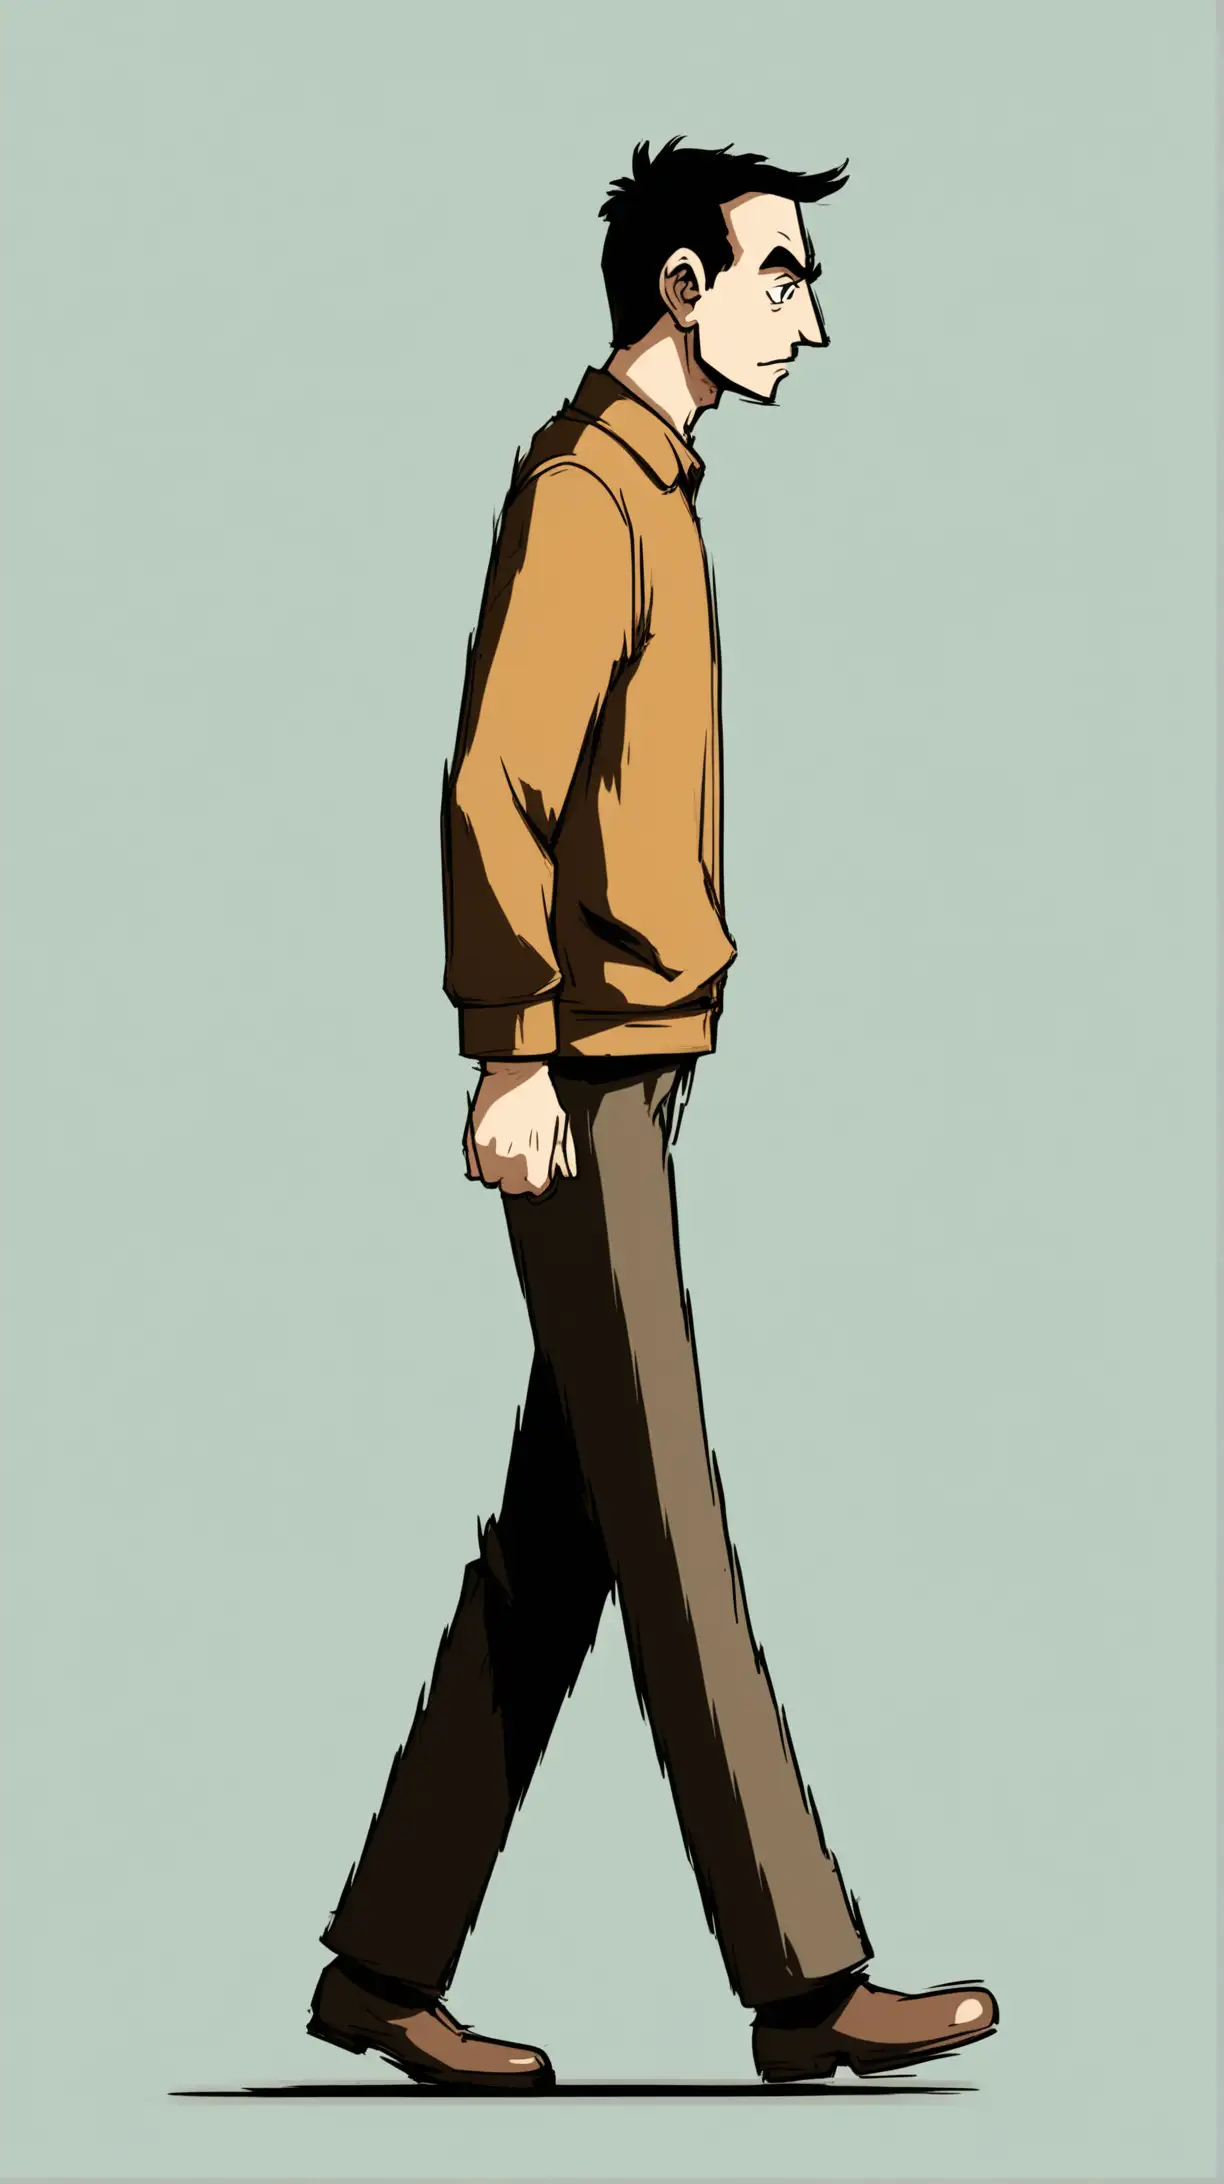 Colorful Cartoon Man Walking with Neutral Expression